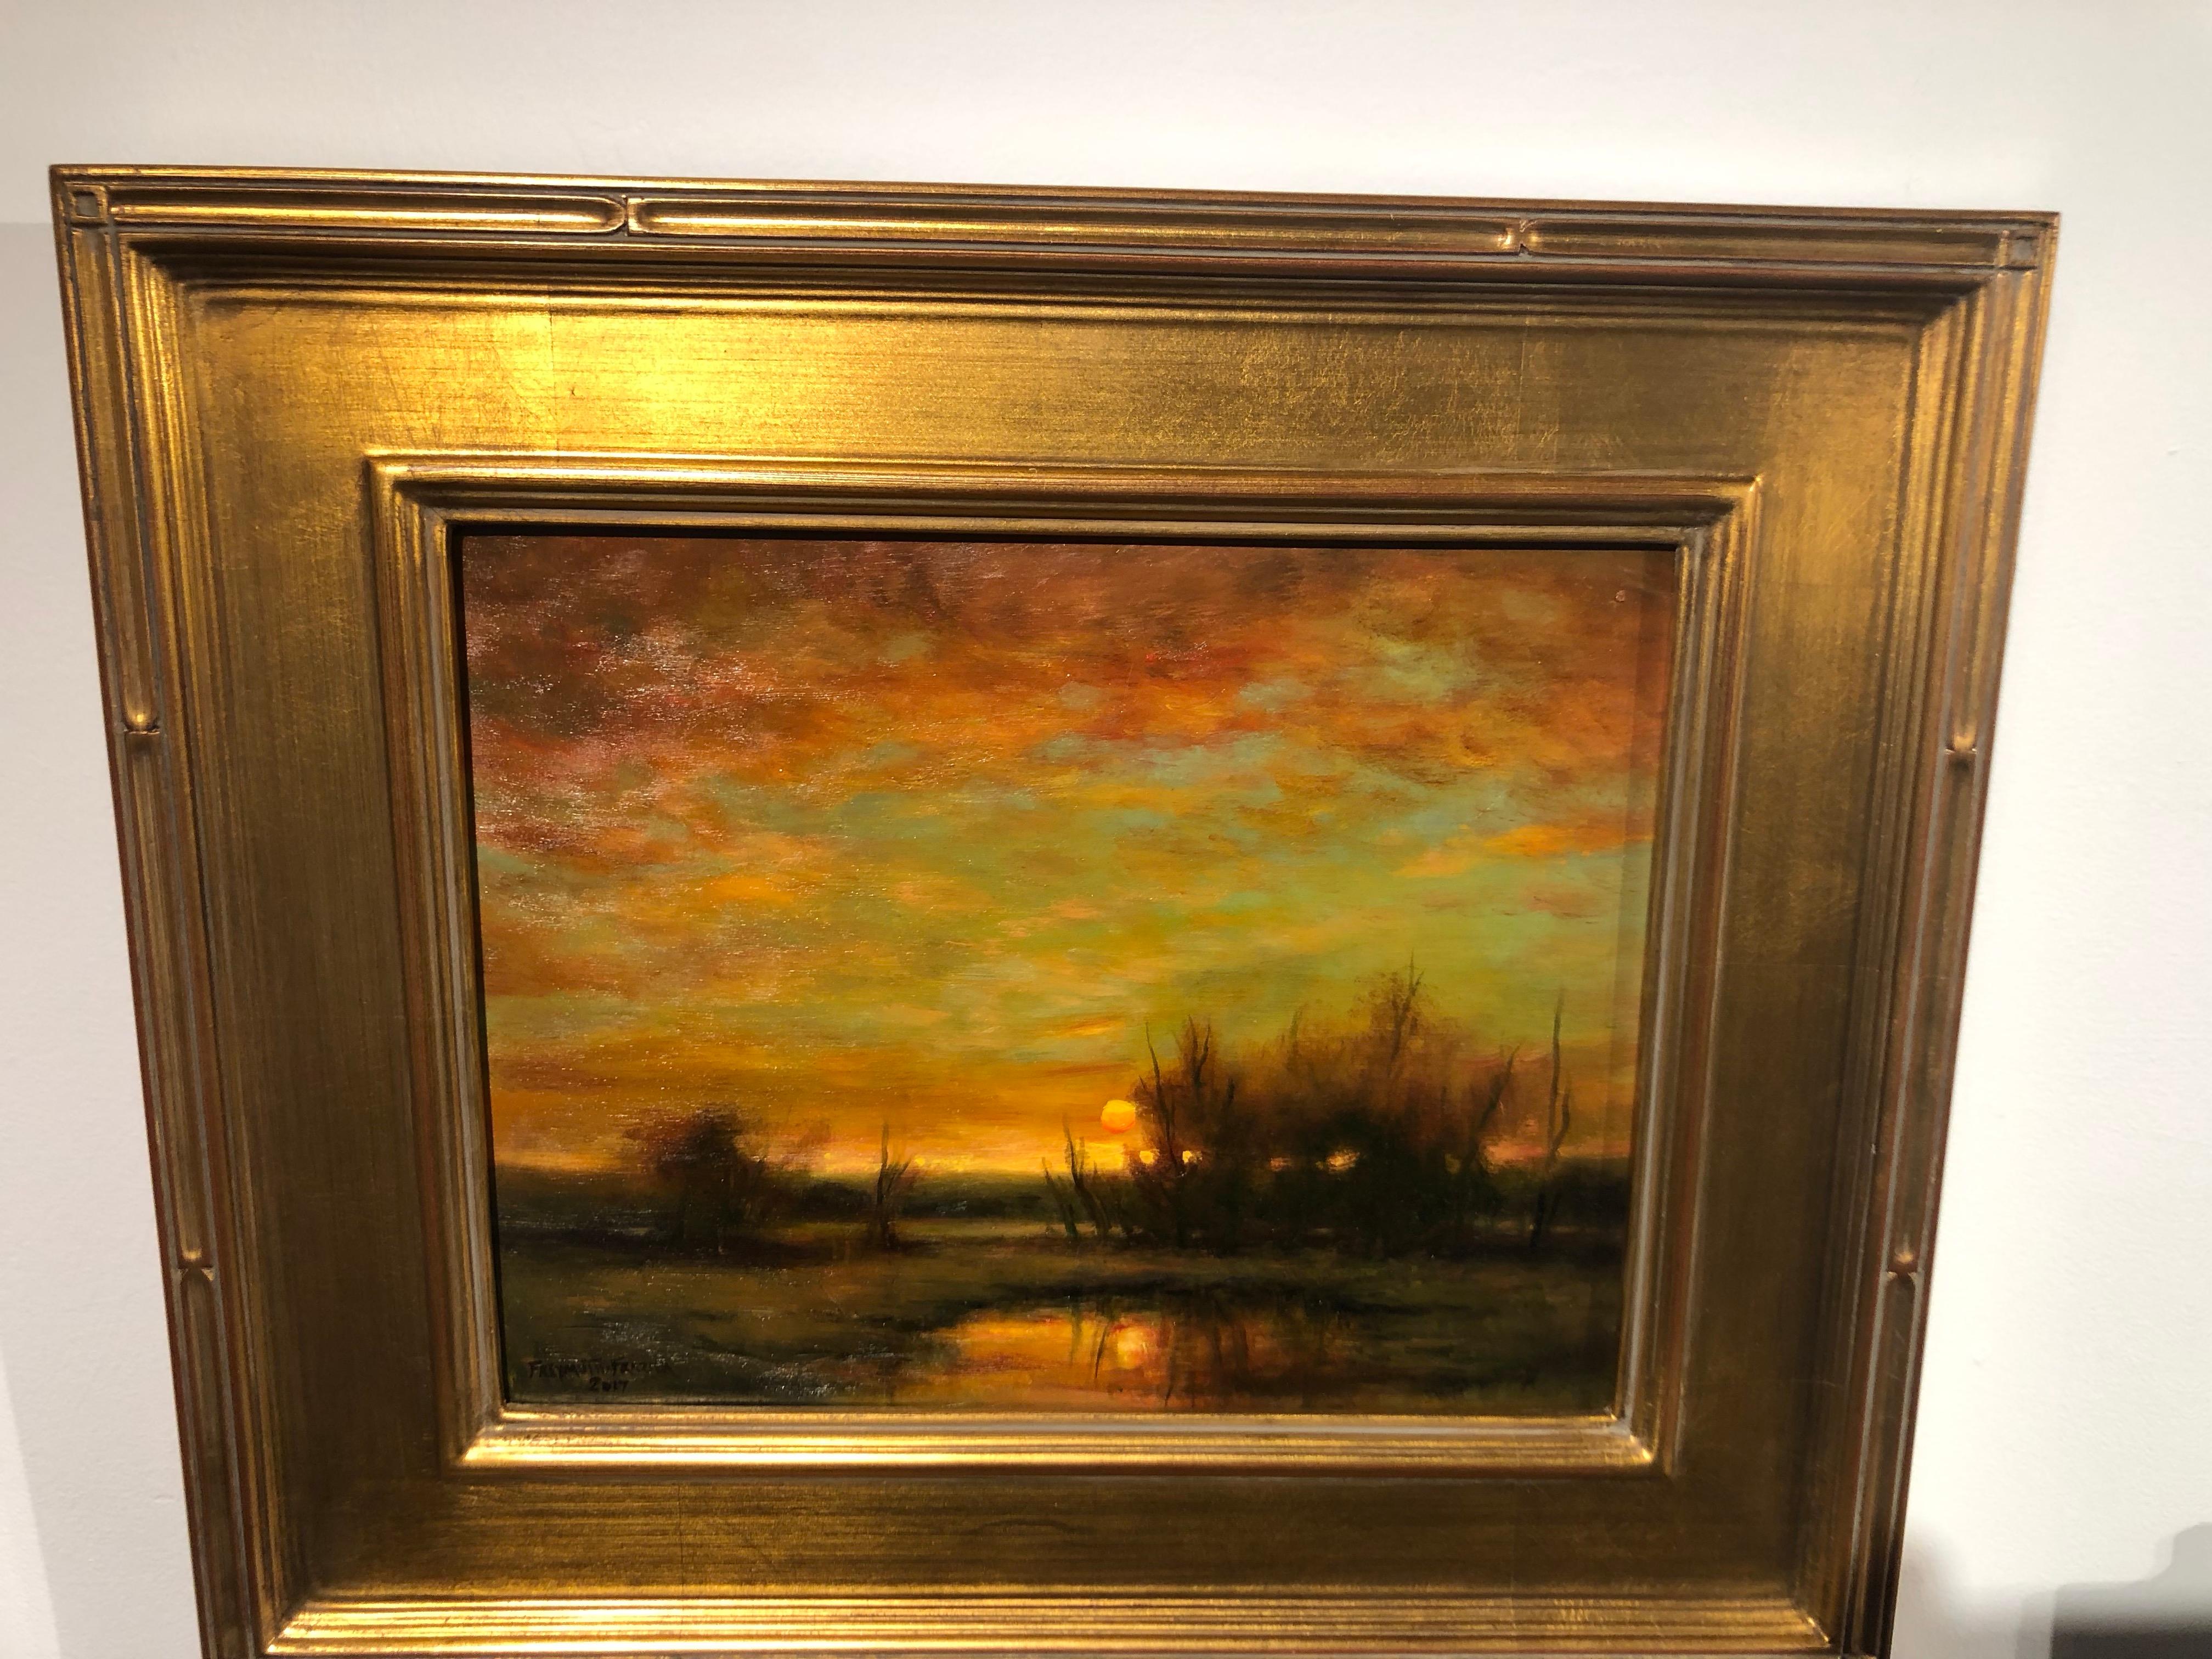 This beautiful painting depicts light passing through clouds in a romantic marsh setting.  The soft colors, gold, green orange and yellow envelop the scene.  Loose brush strokes and layers of paint give this scene depth and dimension.

Rose Freymuth